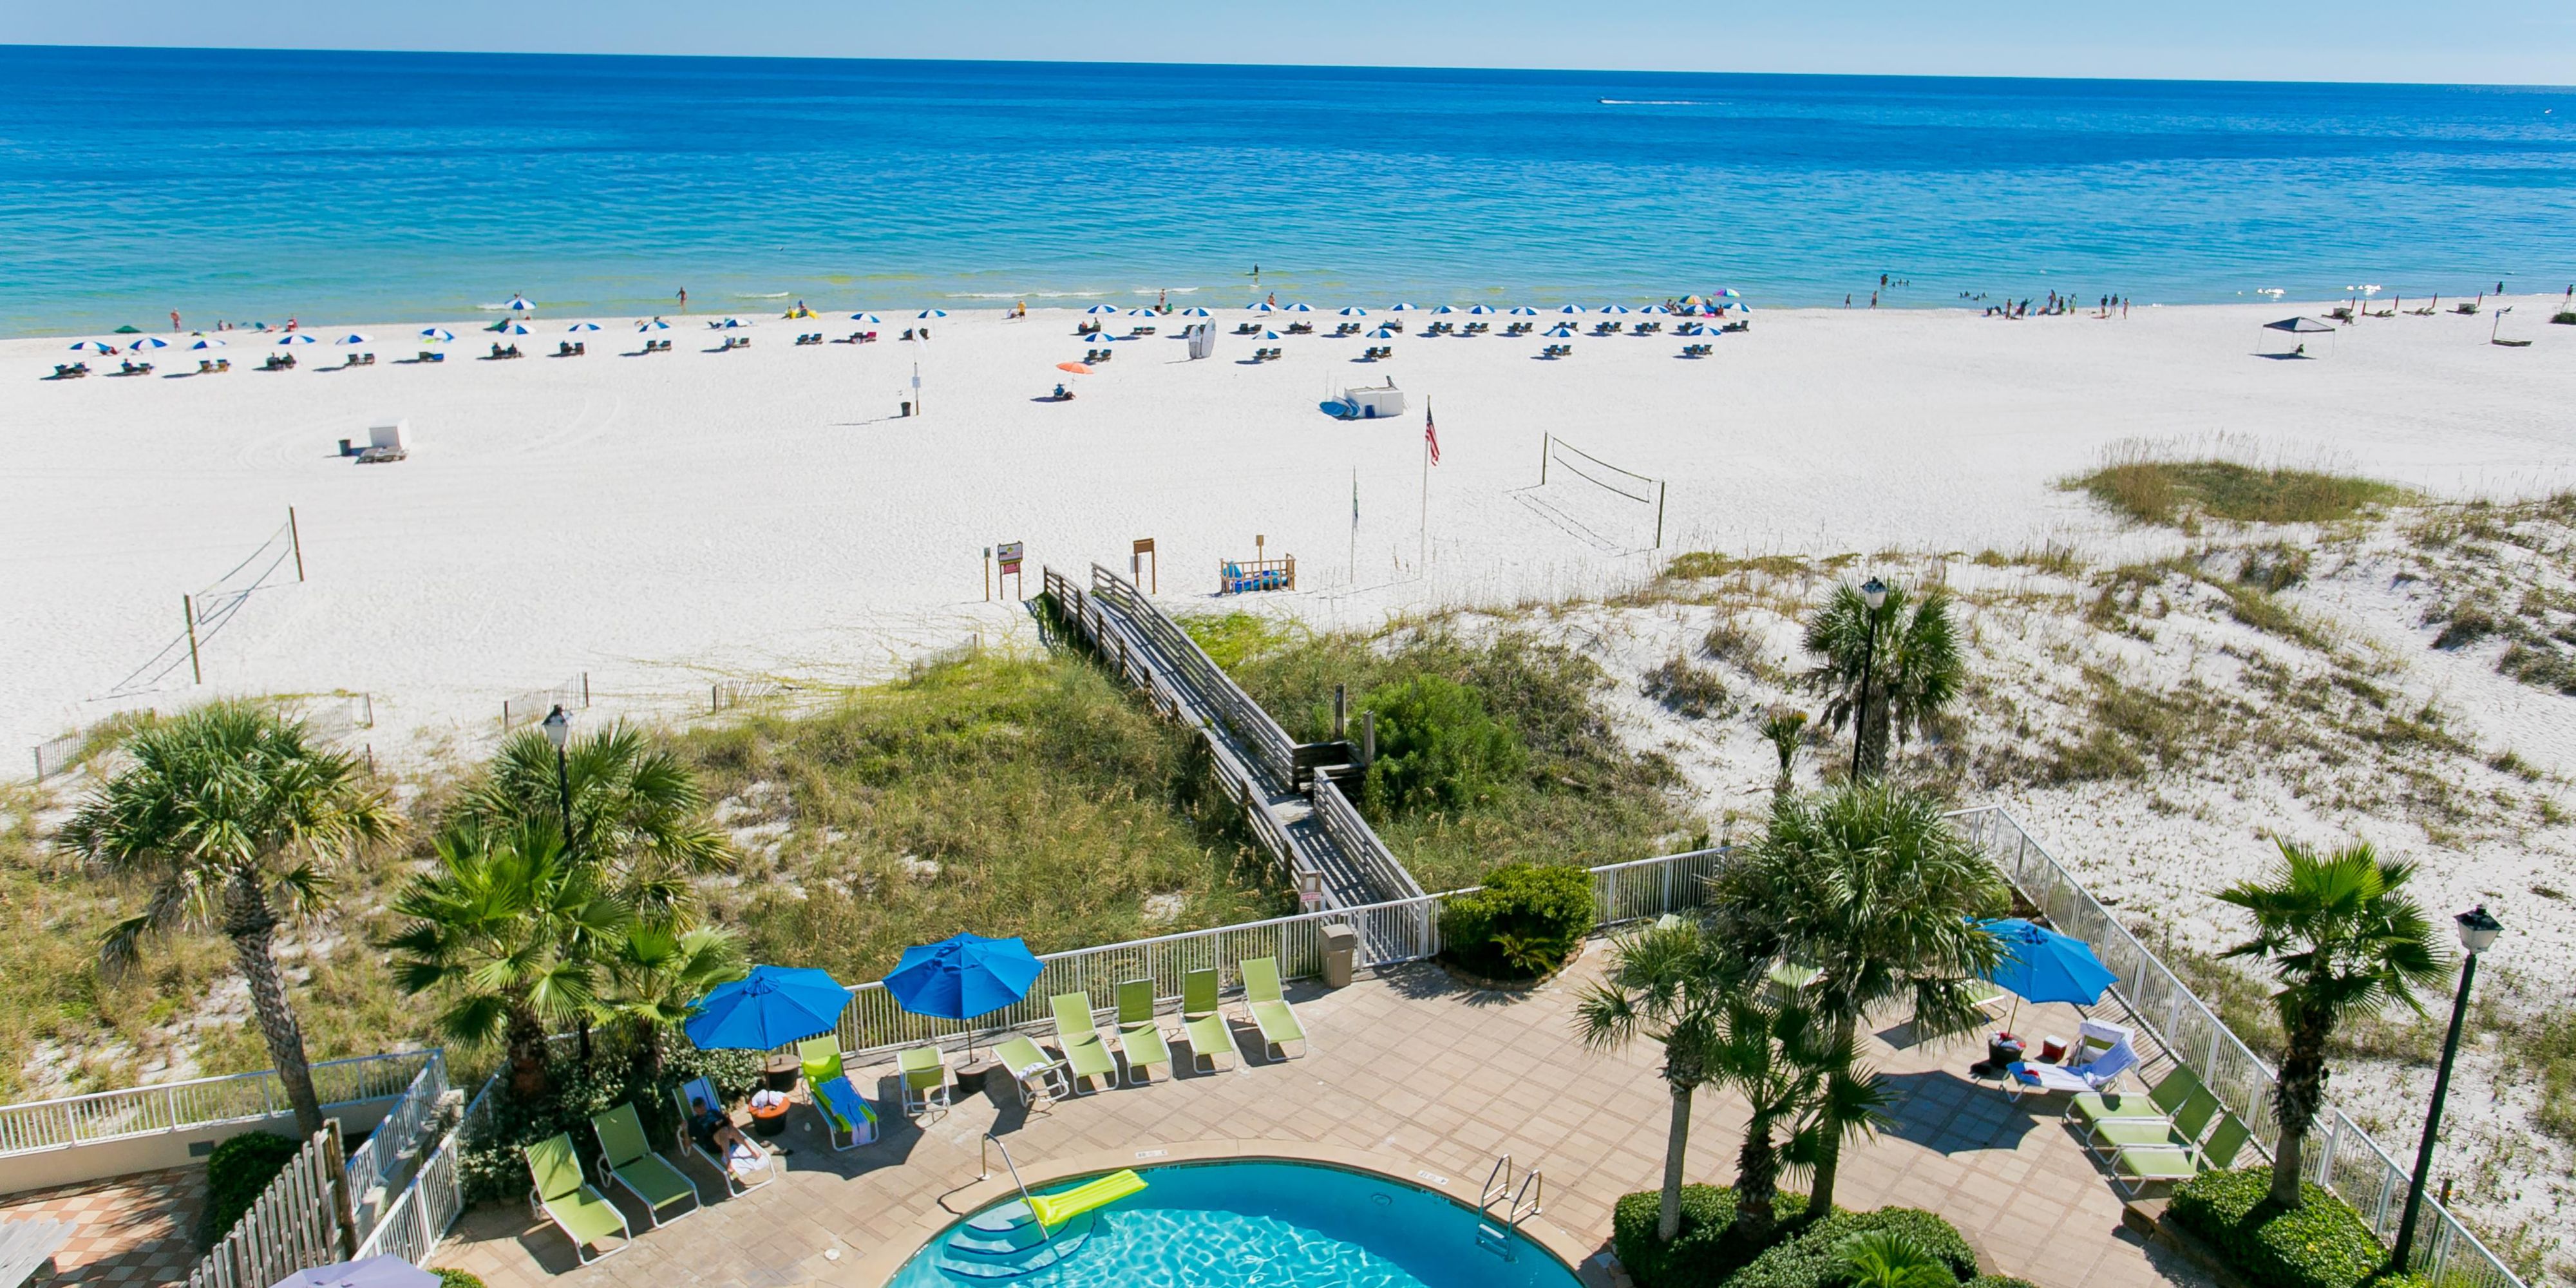 Find out for yourself what the locals have already discovered … that every day can feel like paradise on Alabama’s beaches. Steps from the door of our Orange Beach hotel, you’ll find as much or as little recreation as you desire. So whether you choose to lay in the sun or make a splash in our beachfront pool, our hotel is the perfect place to lose 